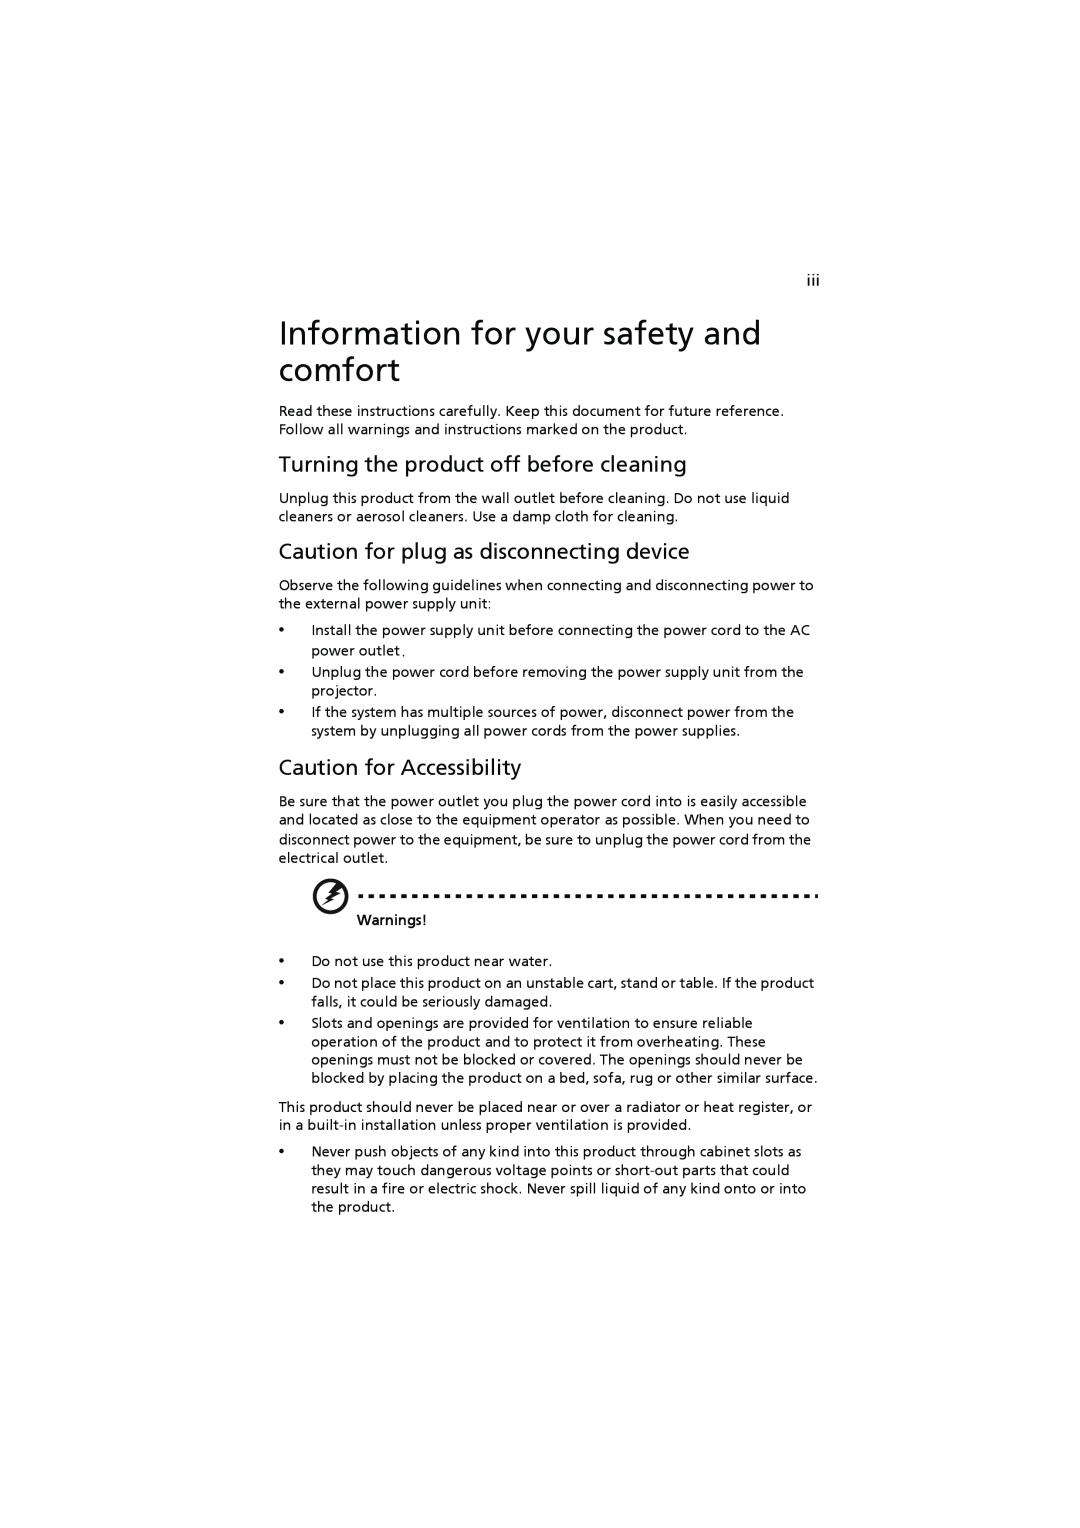 Acer K11 manual Information for your safety and comfort, Turning the product off before cleaning, Caution for Accessibility 